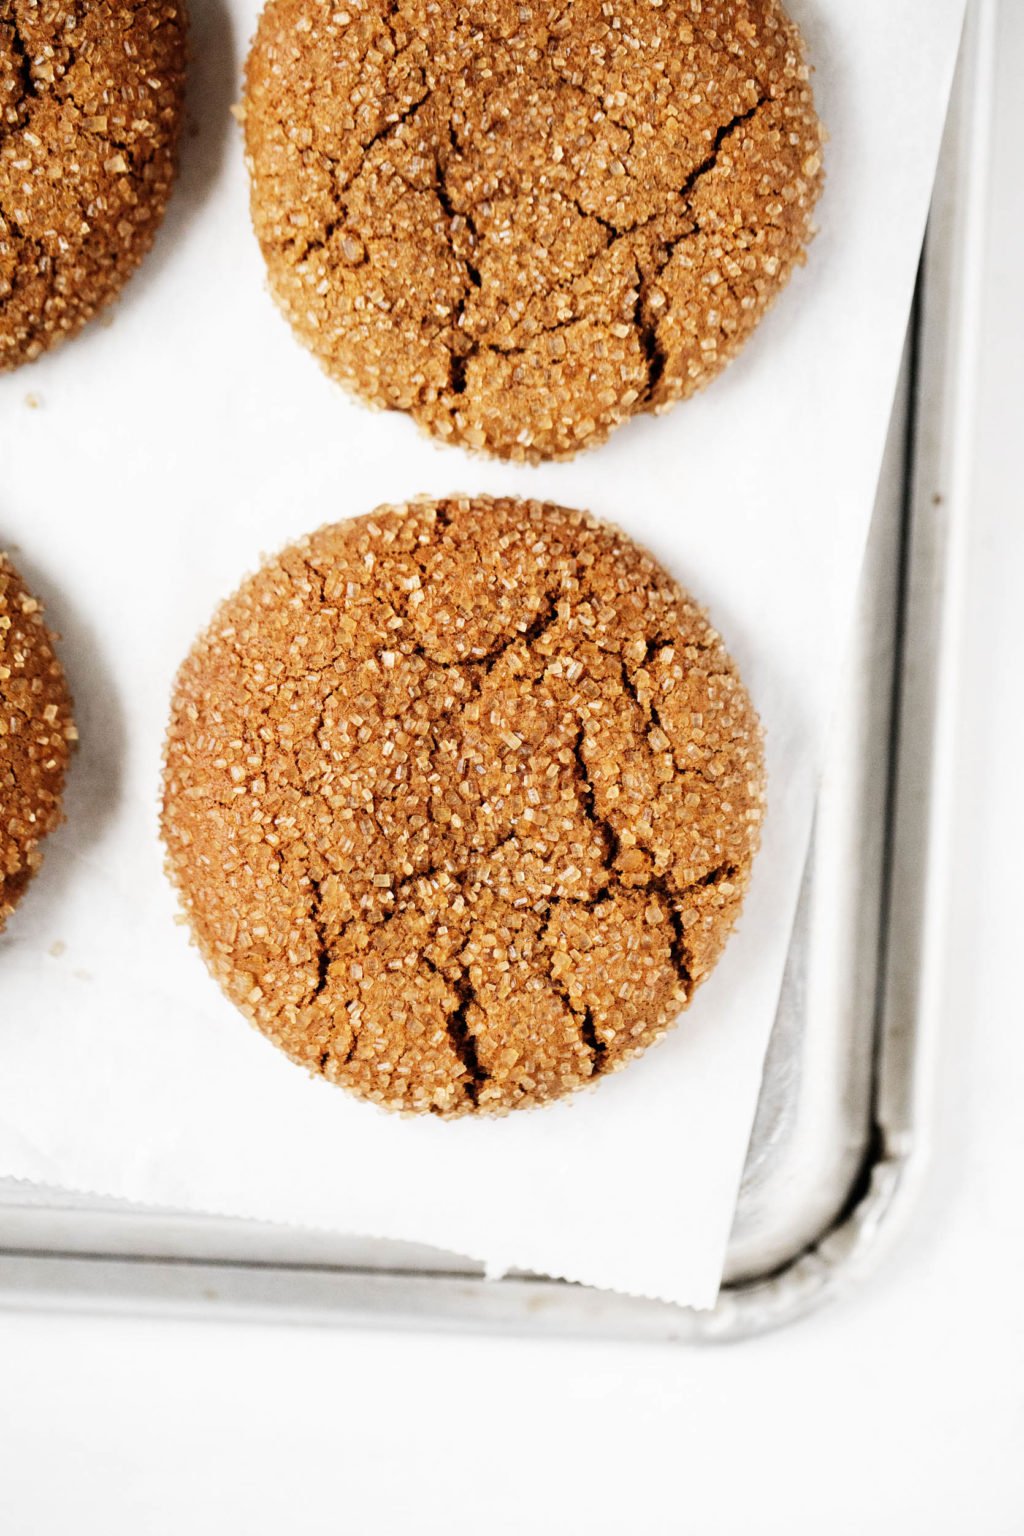 A baking sheet is lined with parchment and scattered with vegan molasses ginger cookies.